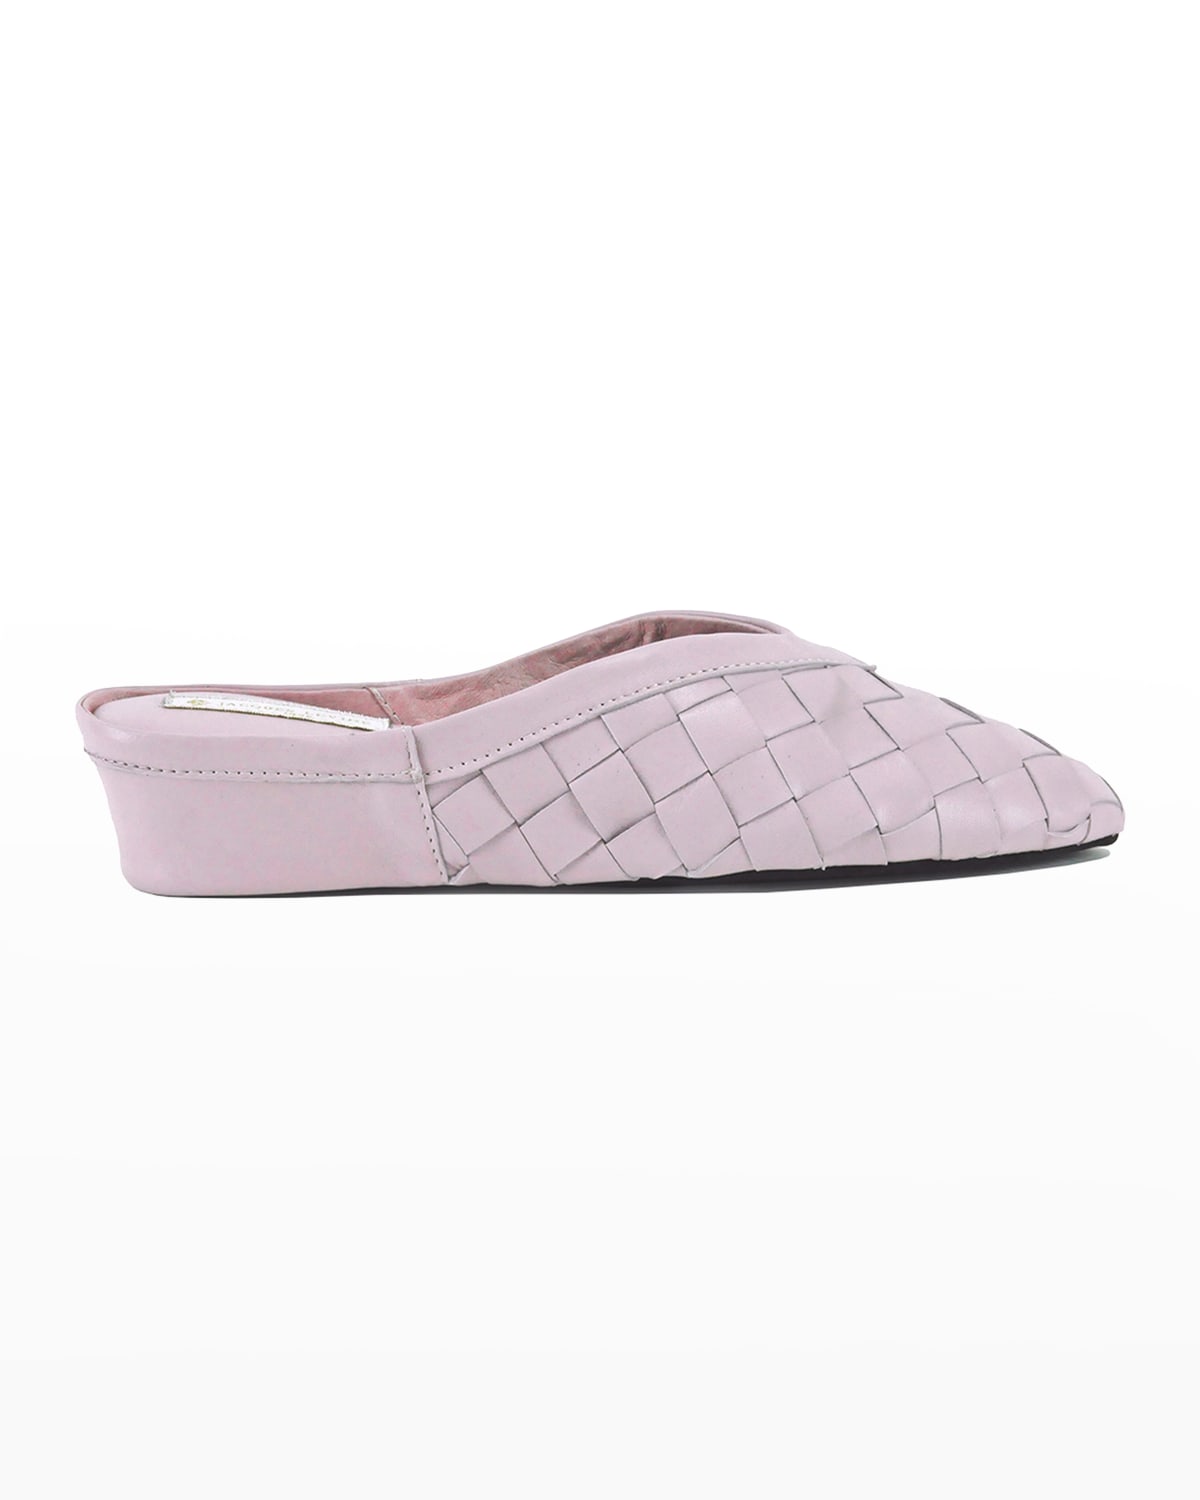 Jacques Levine Woven Leather Wedge Slippers